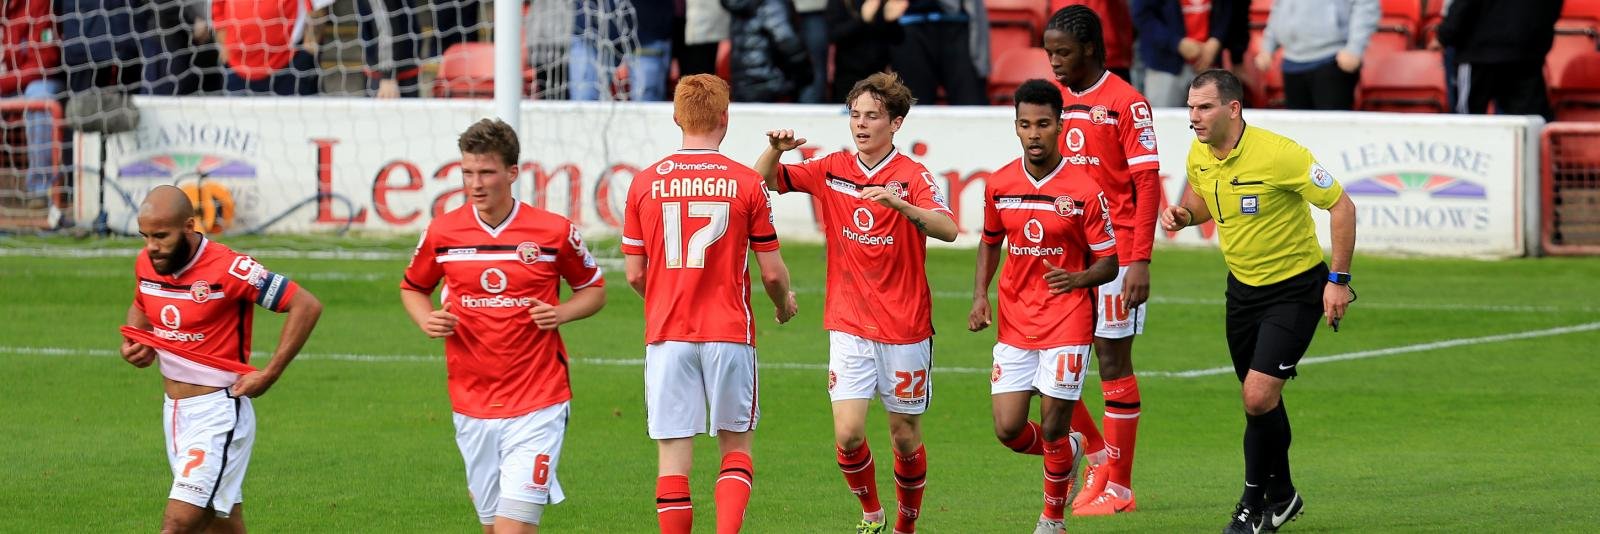 League One Round-Up: Walsall climb into second, Southend nearing the play-offs